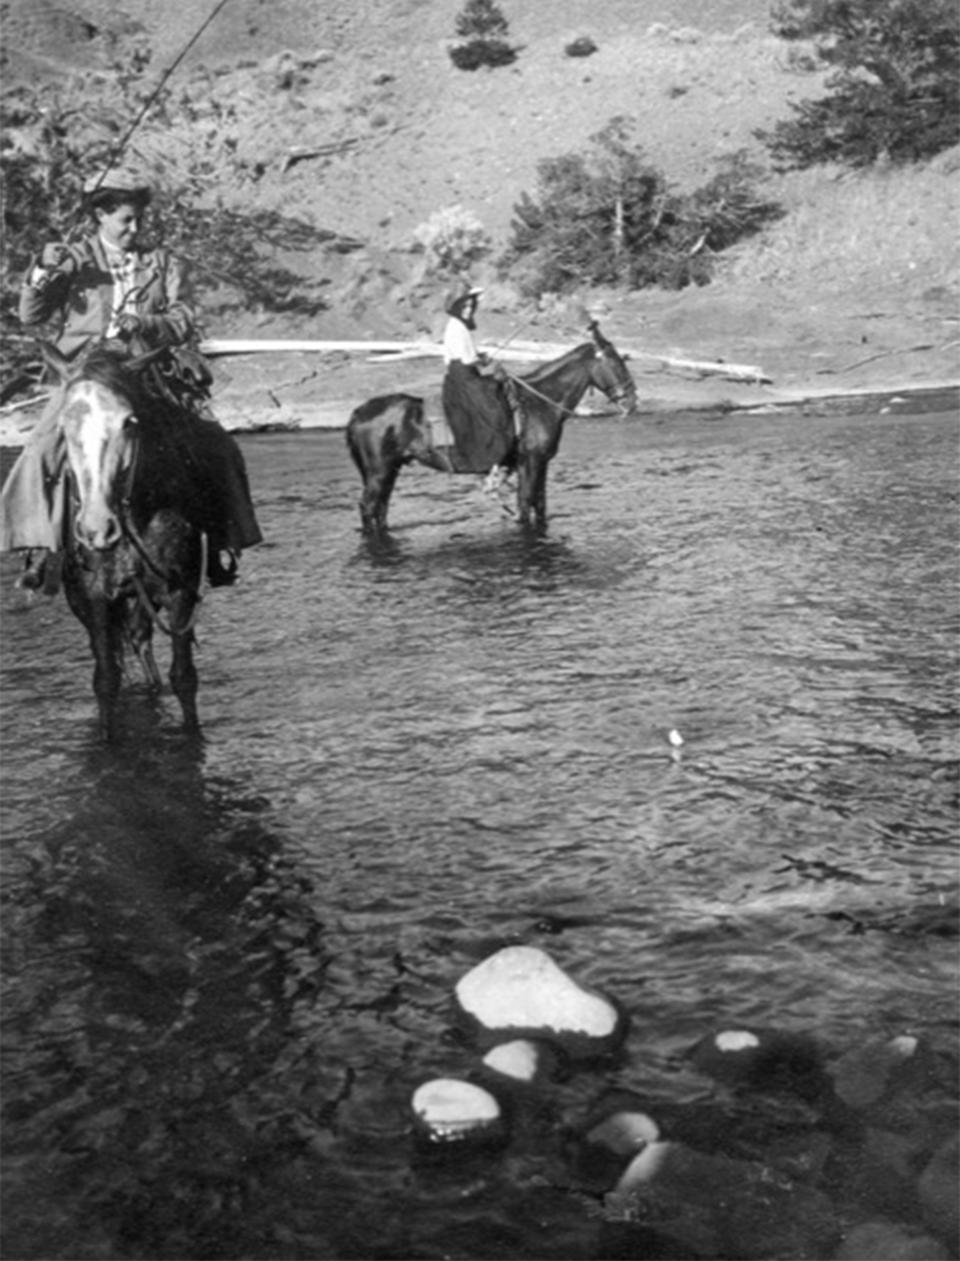 Early Wyoming outfitters took their clients on fishing excursions, which included guide services and tackle. Here, women fish from horseback in Yellowstone National Park. Ned Frost photo. Courtesy Bob Richard.